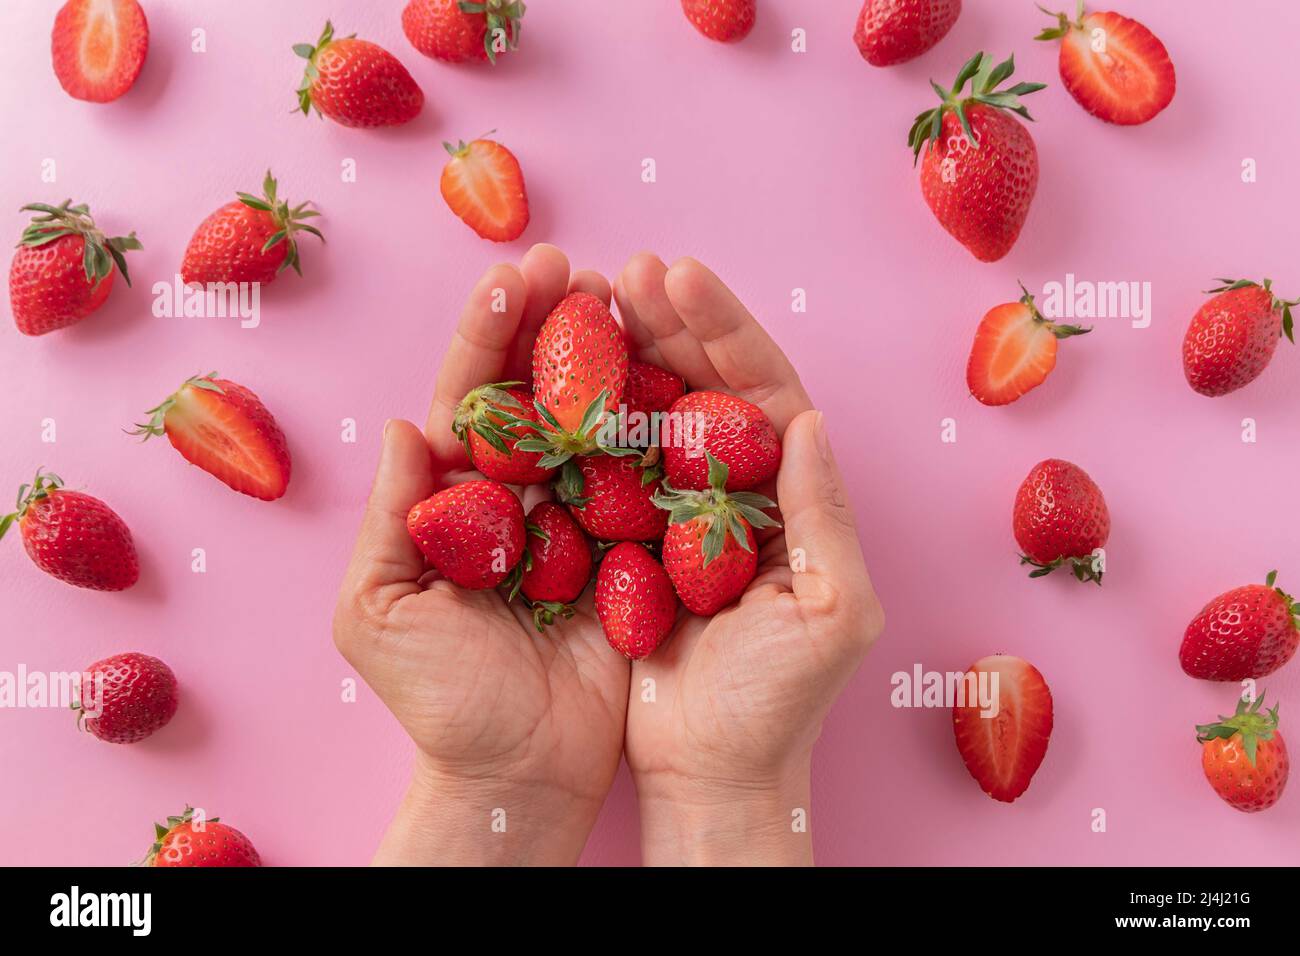 Top view of woman's hands holding ripe juicy strawberries on a pastel pink background Stock Photo